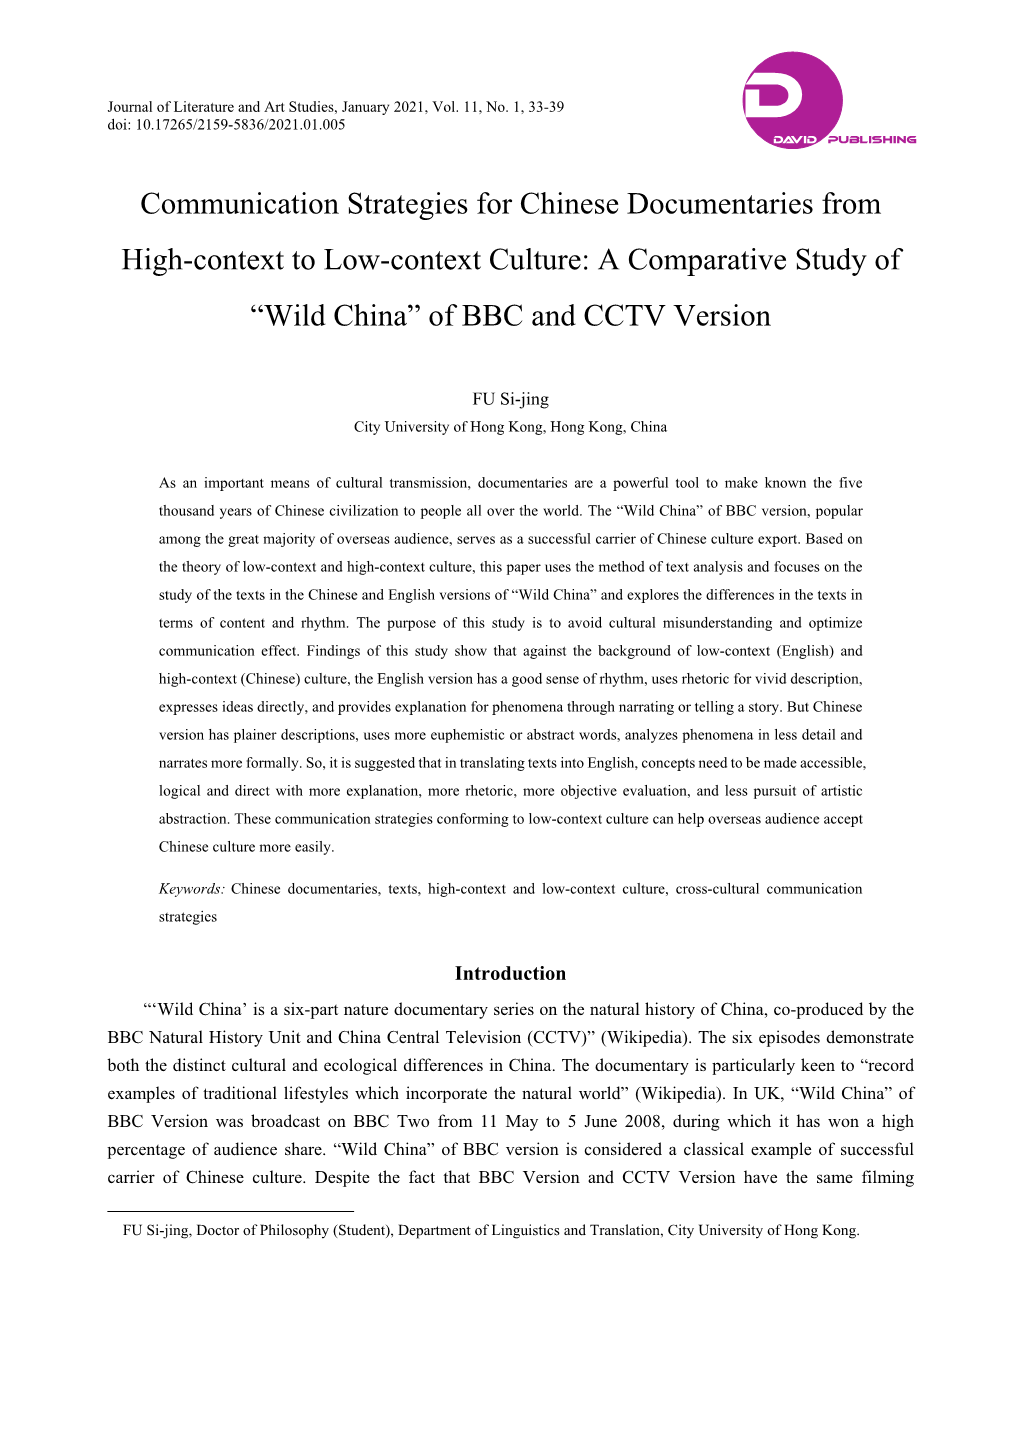 Communication Strategies for Chinese Documentaries from High-Context to Low-Context Culture: a Comparative Study of “Wild China” of BBC and CCTV Version